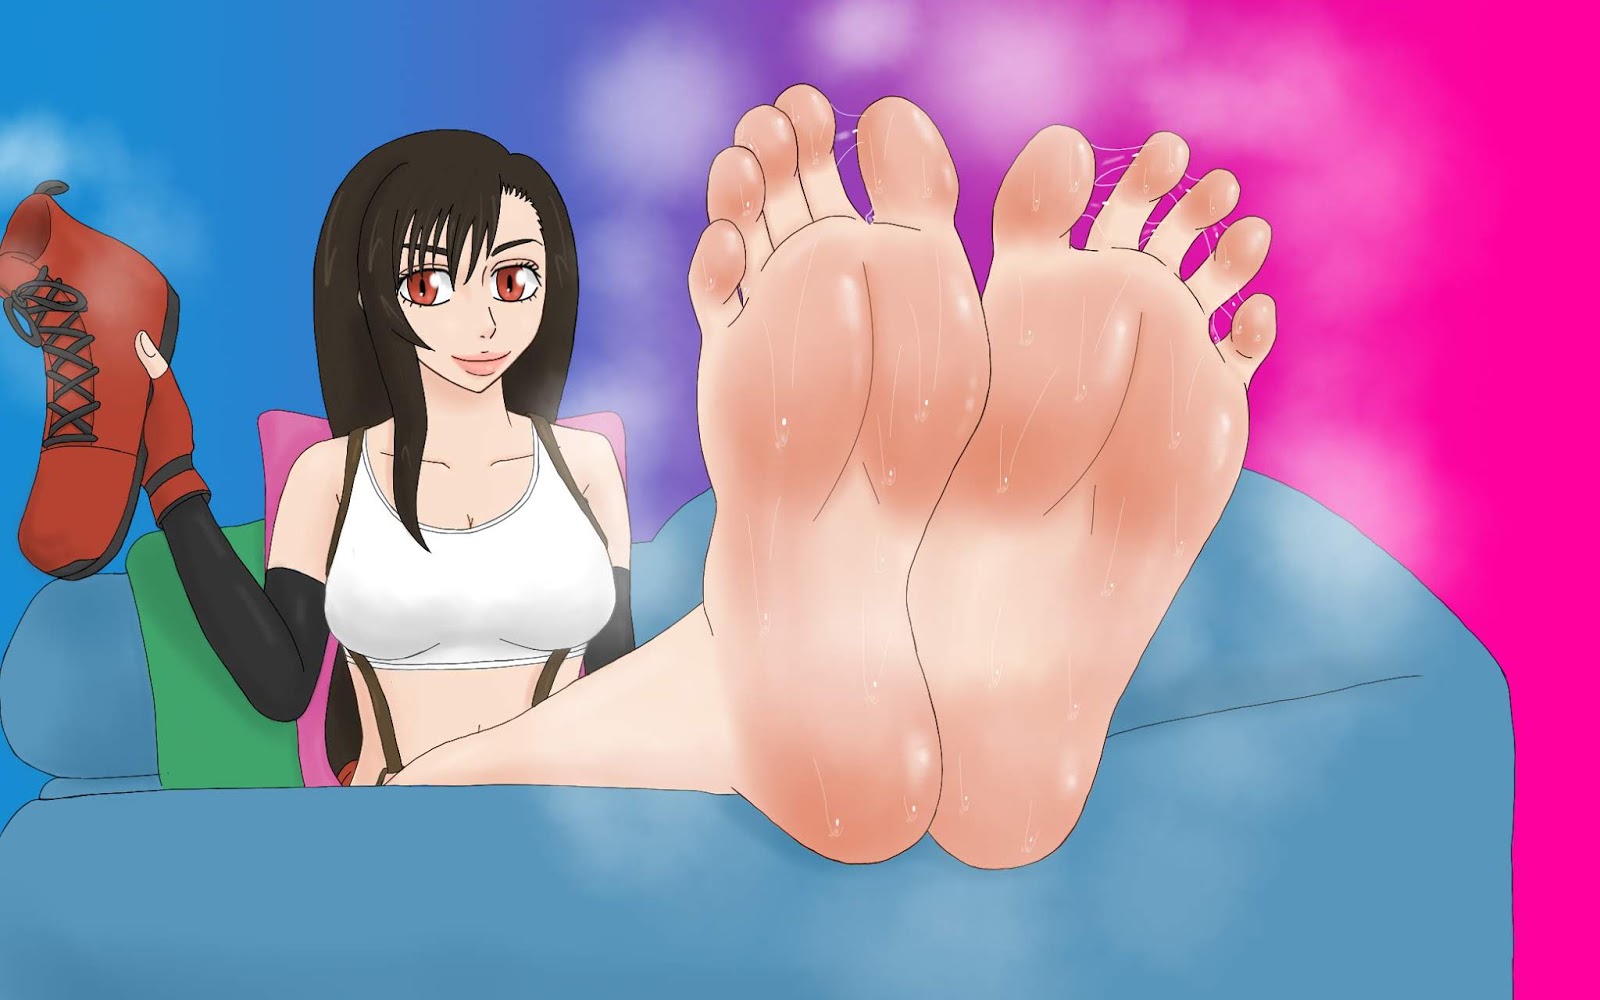 much foot content of Tifa, which is a shame because she looked like the typ...